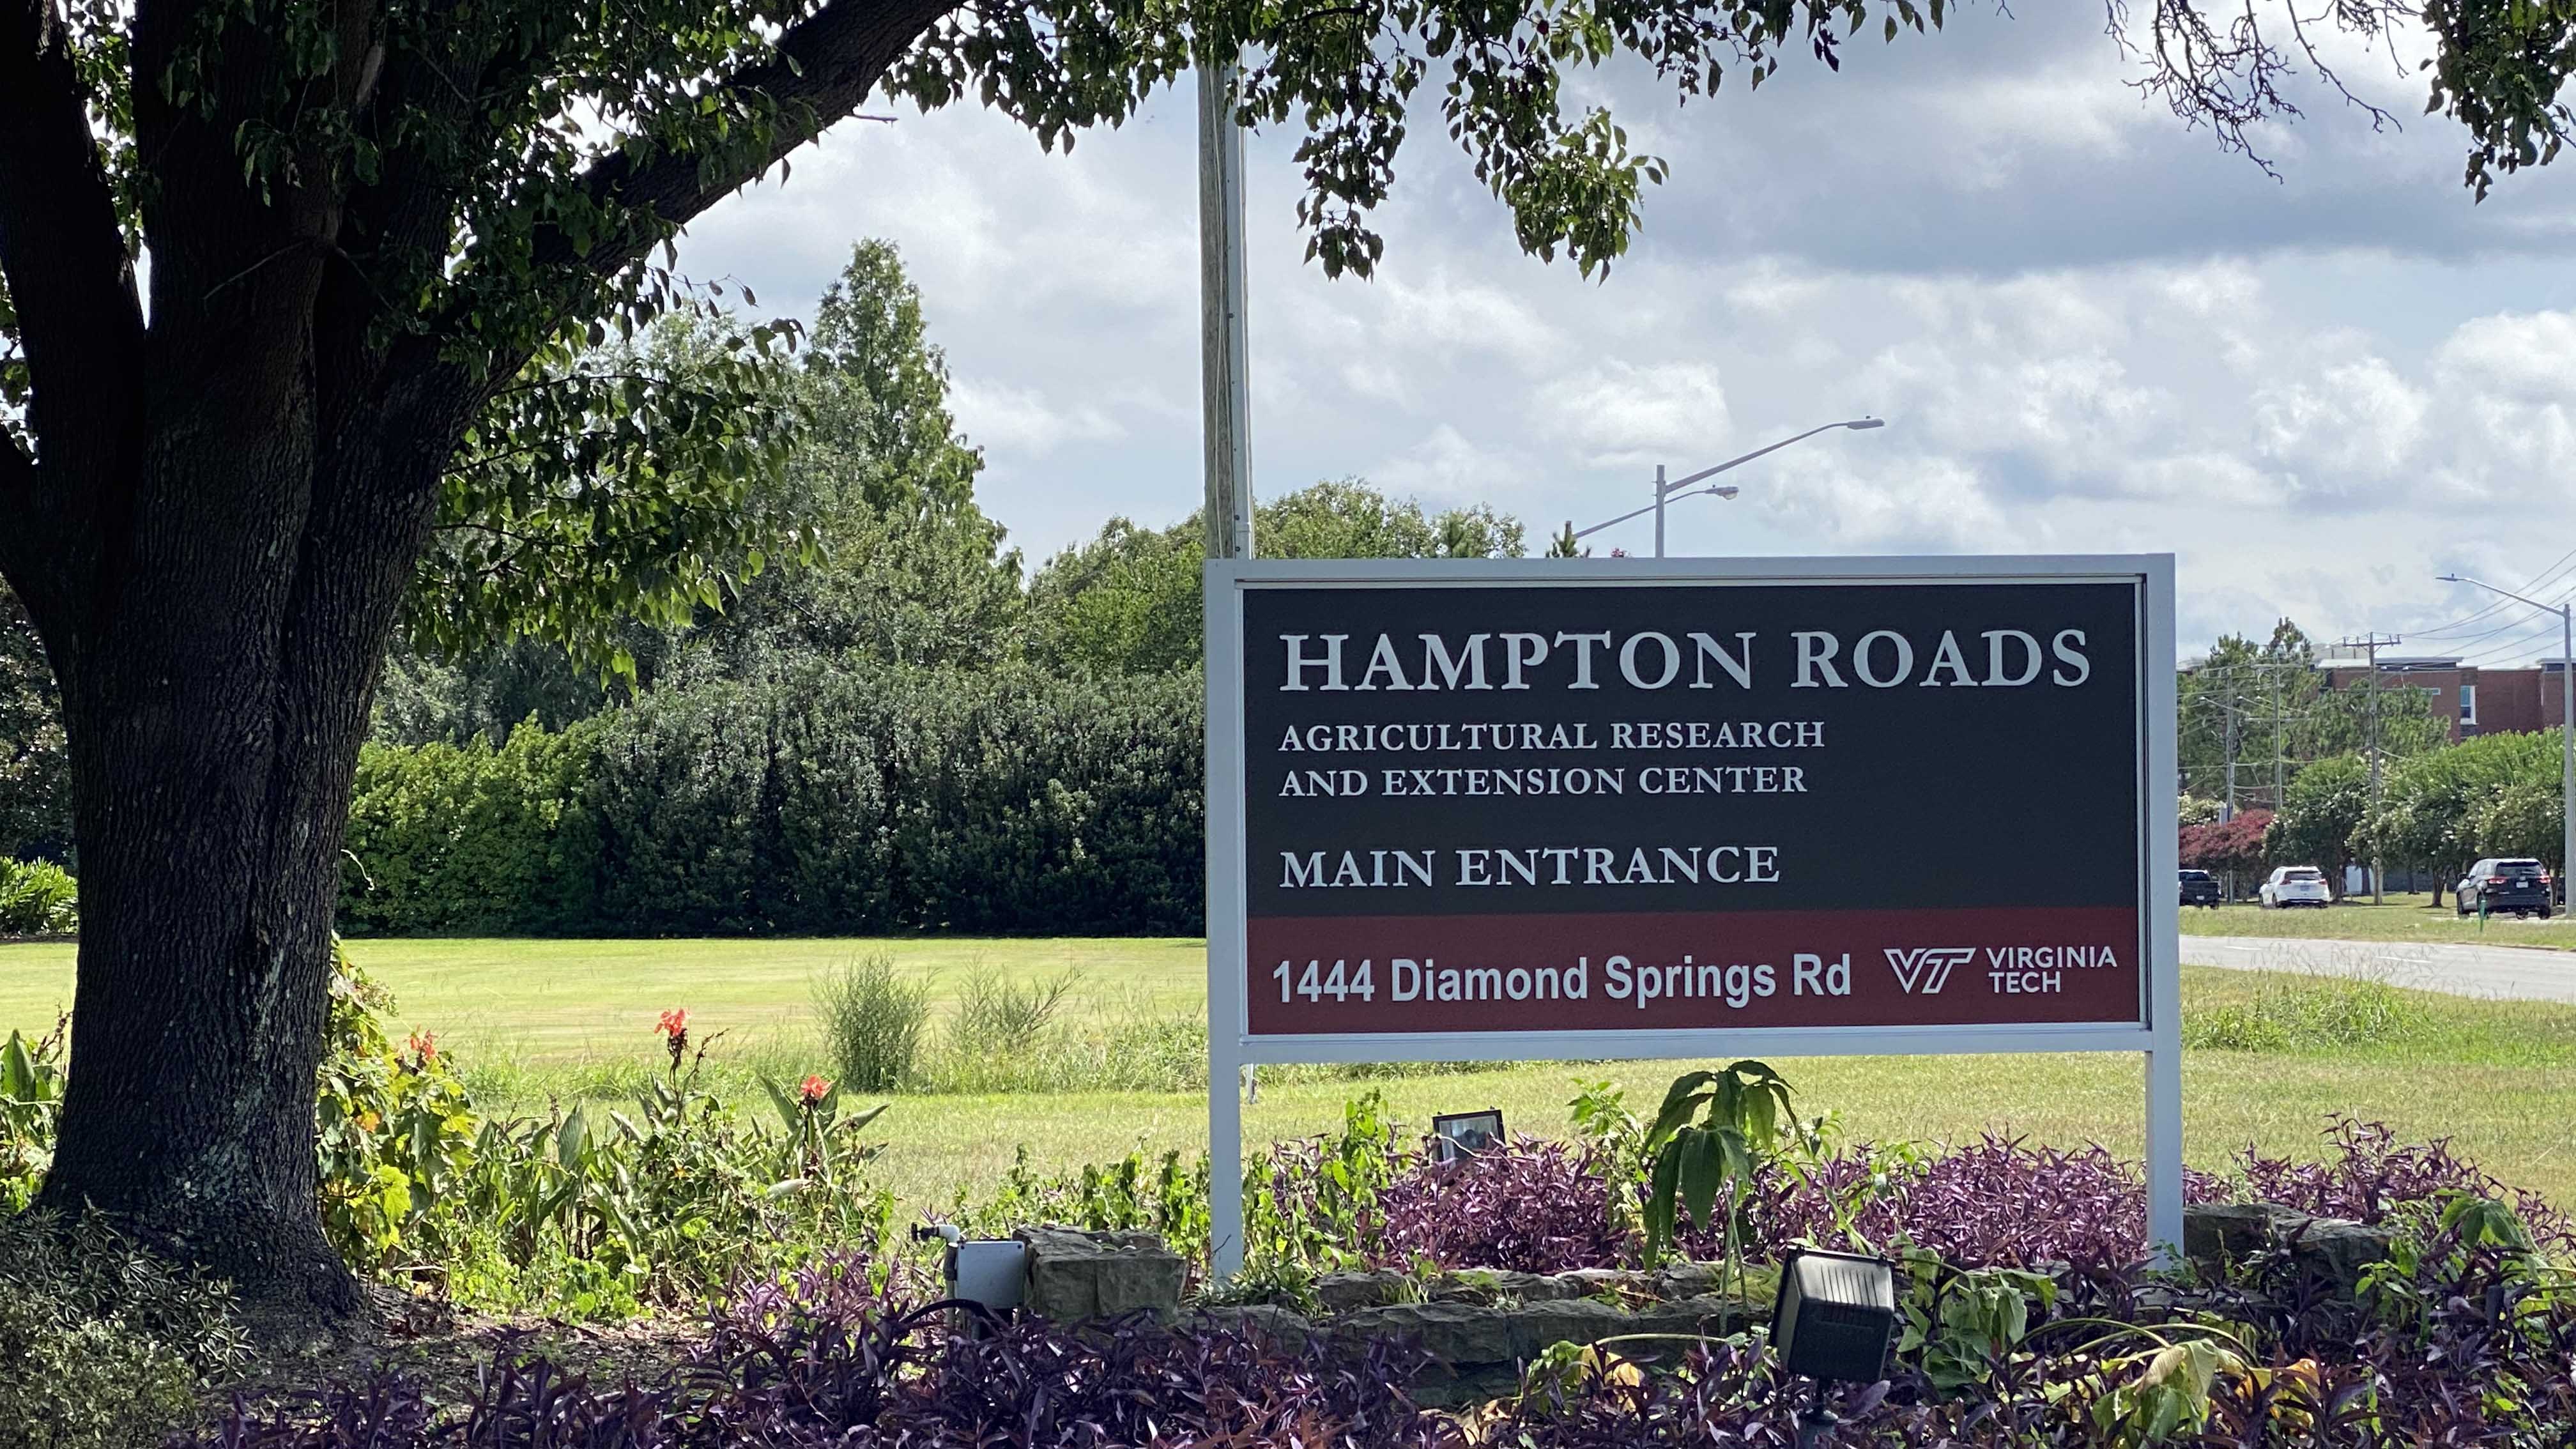 Photo by Katherine Hafner. A sign marks the entrance to the Hampton Roads Agricultural Research and Extension Center in Virginia Beach.